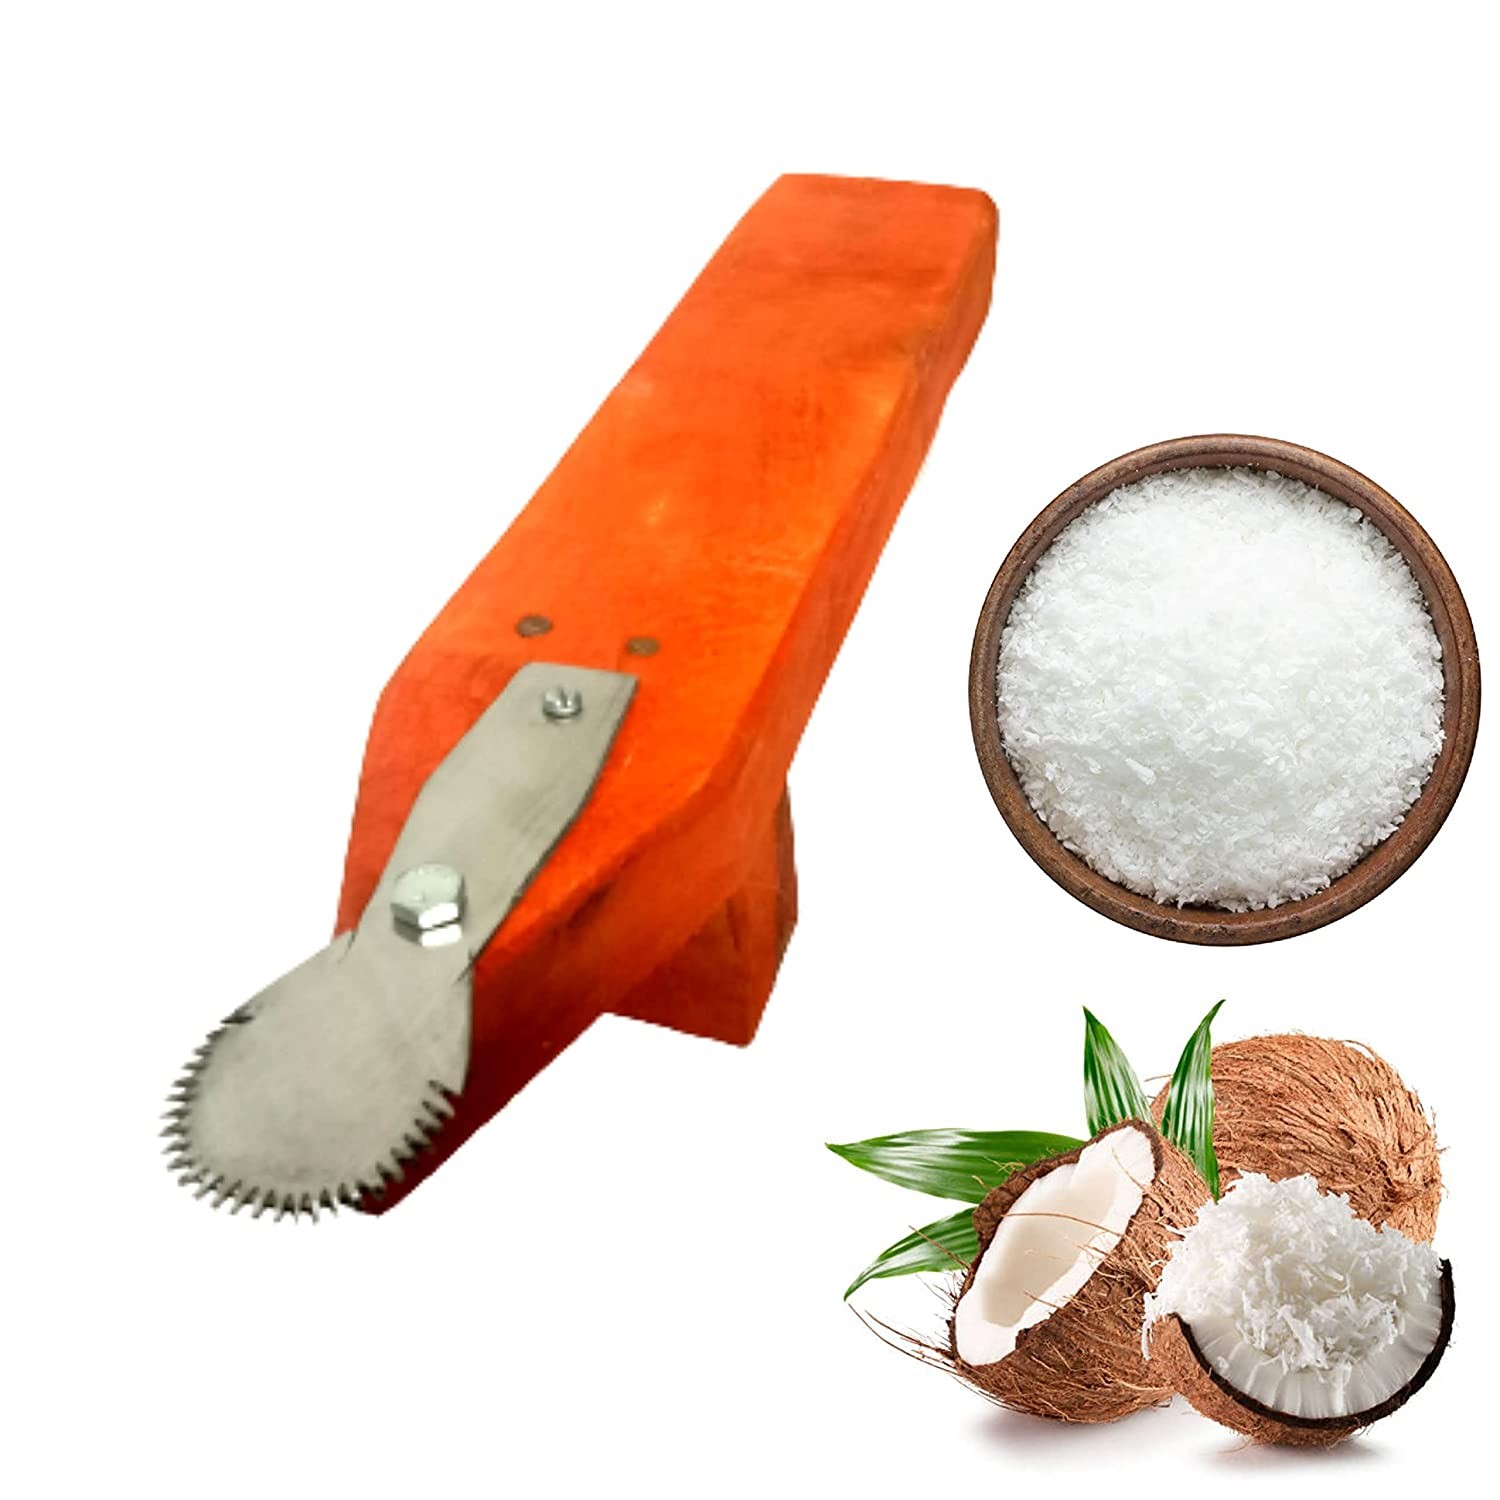 Simsnura wood Coconut Scraper Manual Grater | Malapar | Handcrafted Movable Coconut Scraper with Stainless Steel Balad | Grater | Chopper | Peeler | Thengathuruvi | Food Processor for Kitchen